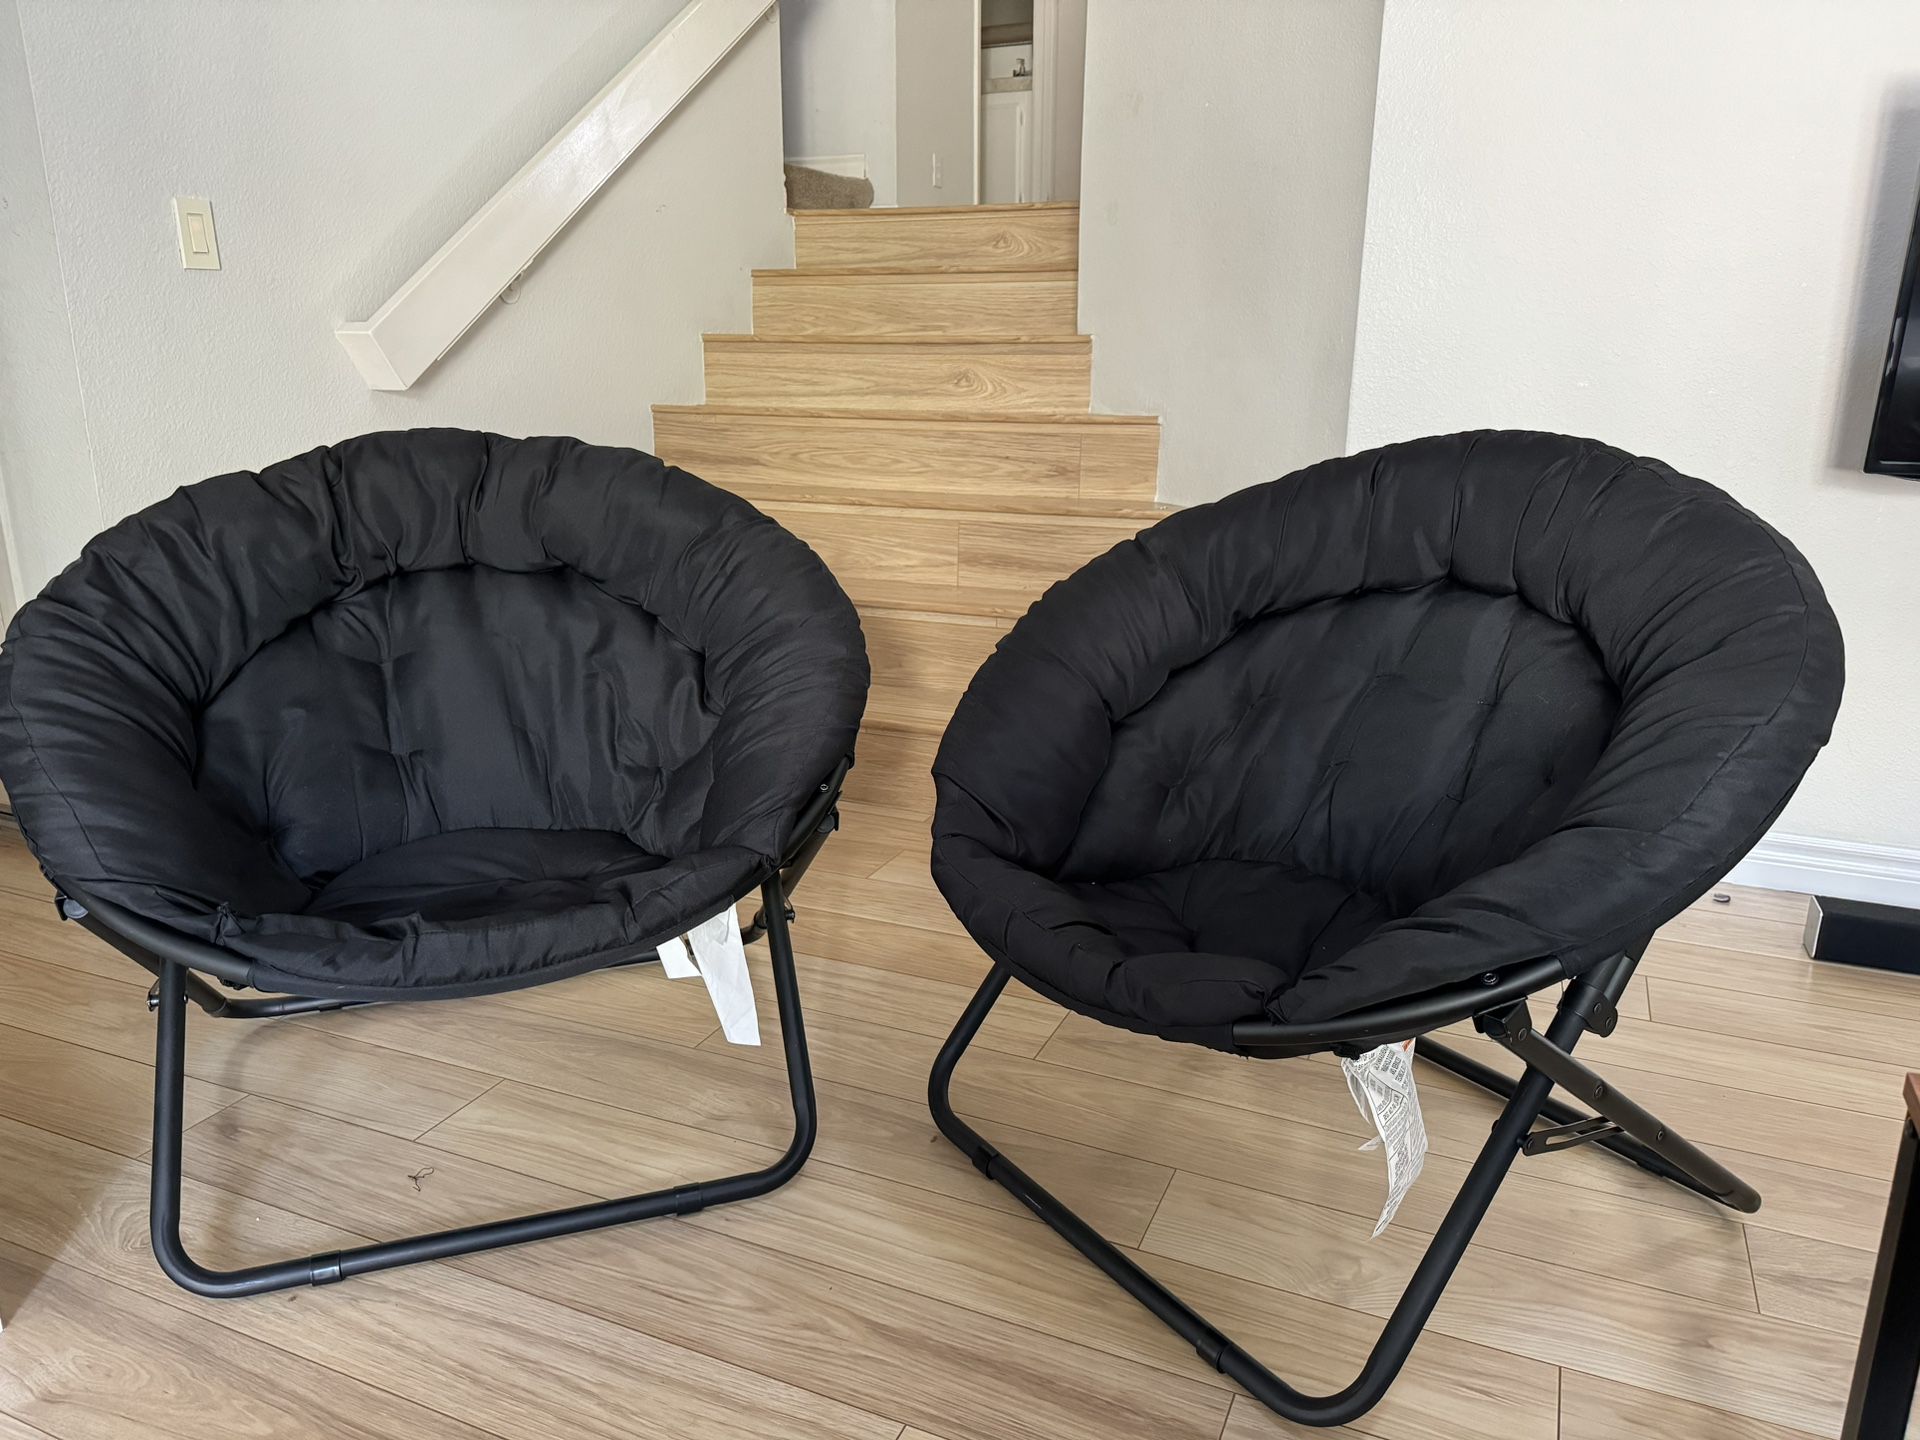 Oversized Saucer Chairs